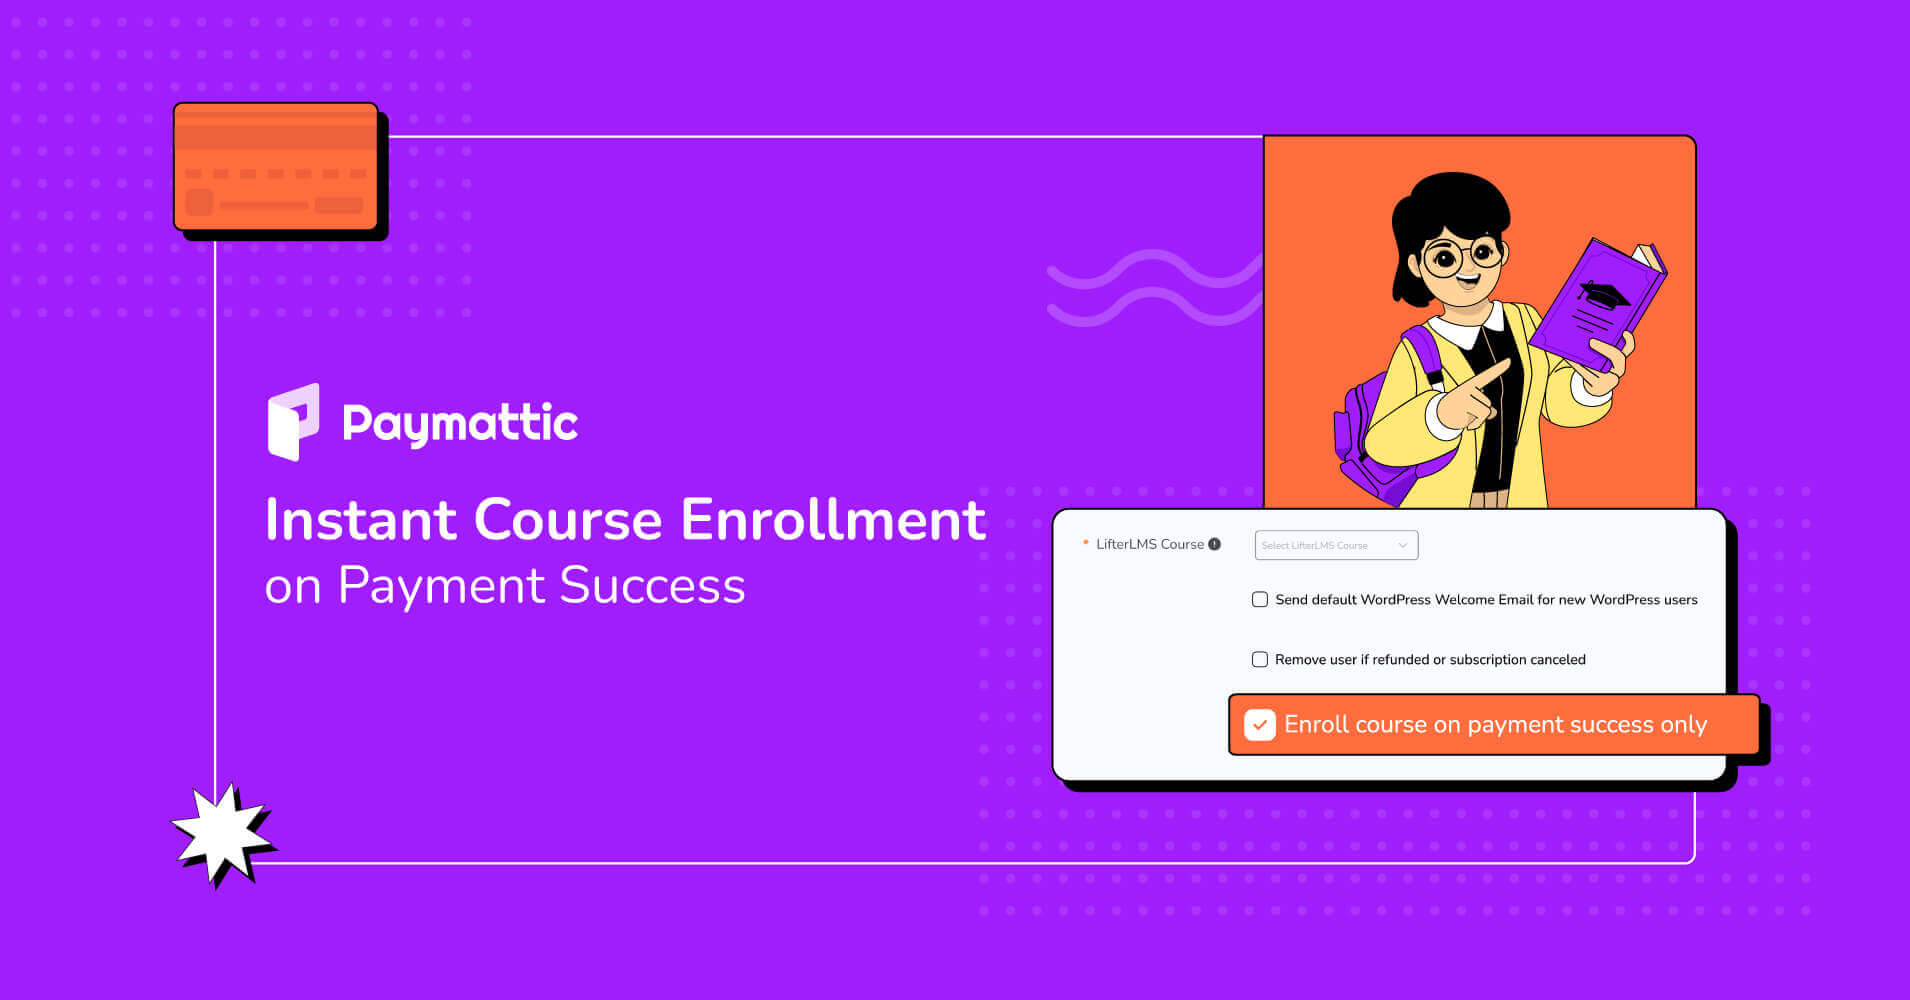 enroll course on payment success